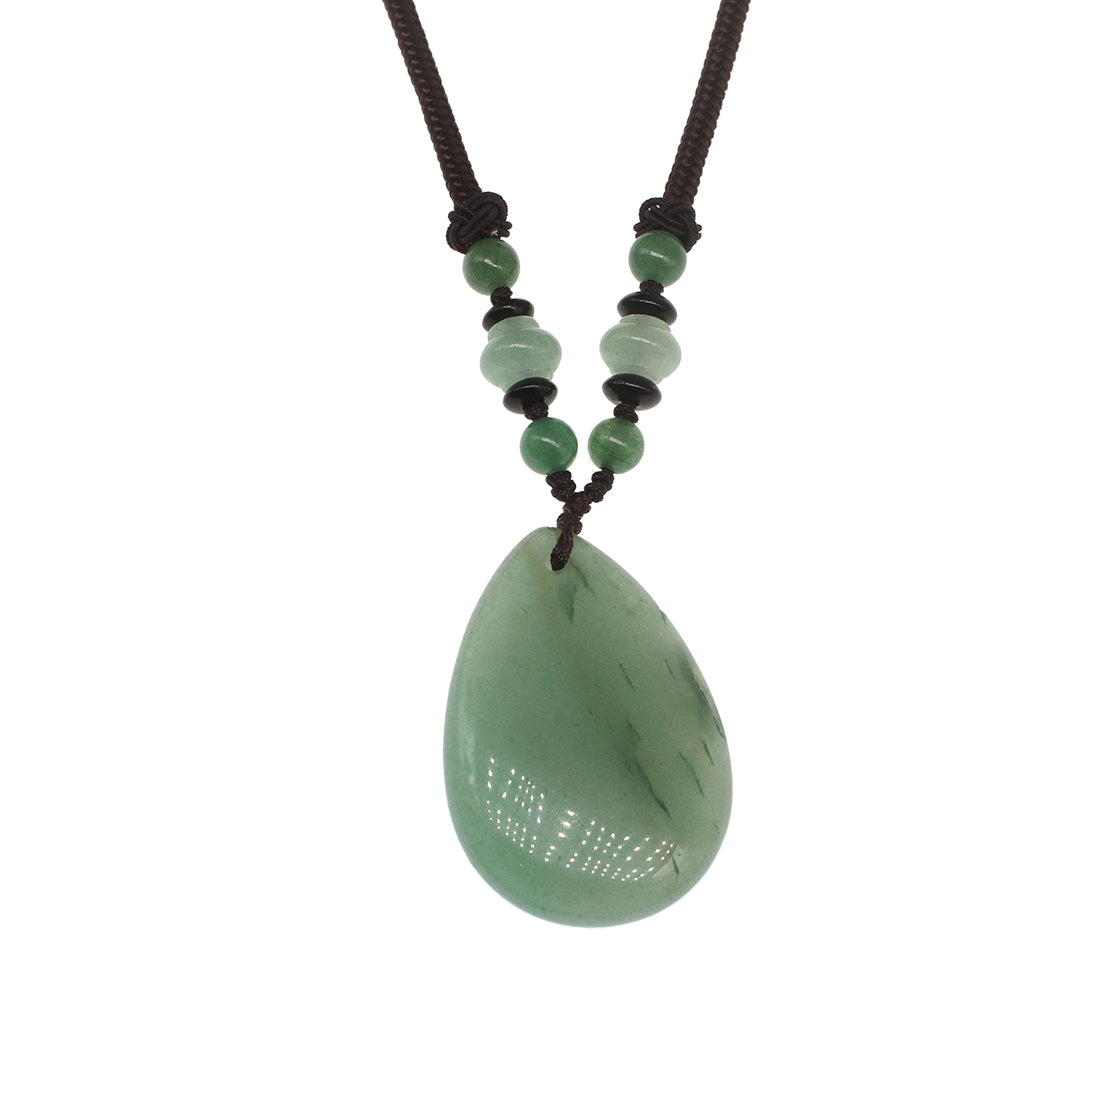 Pear Jade Malaysia Gemstone Pendant with Necklace - 42x27mm - Length 12 inch - 26g - NEW1021